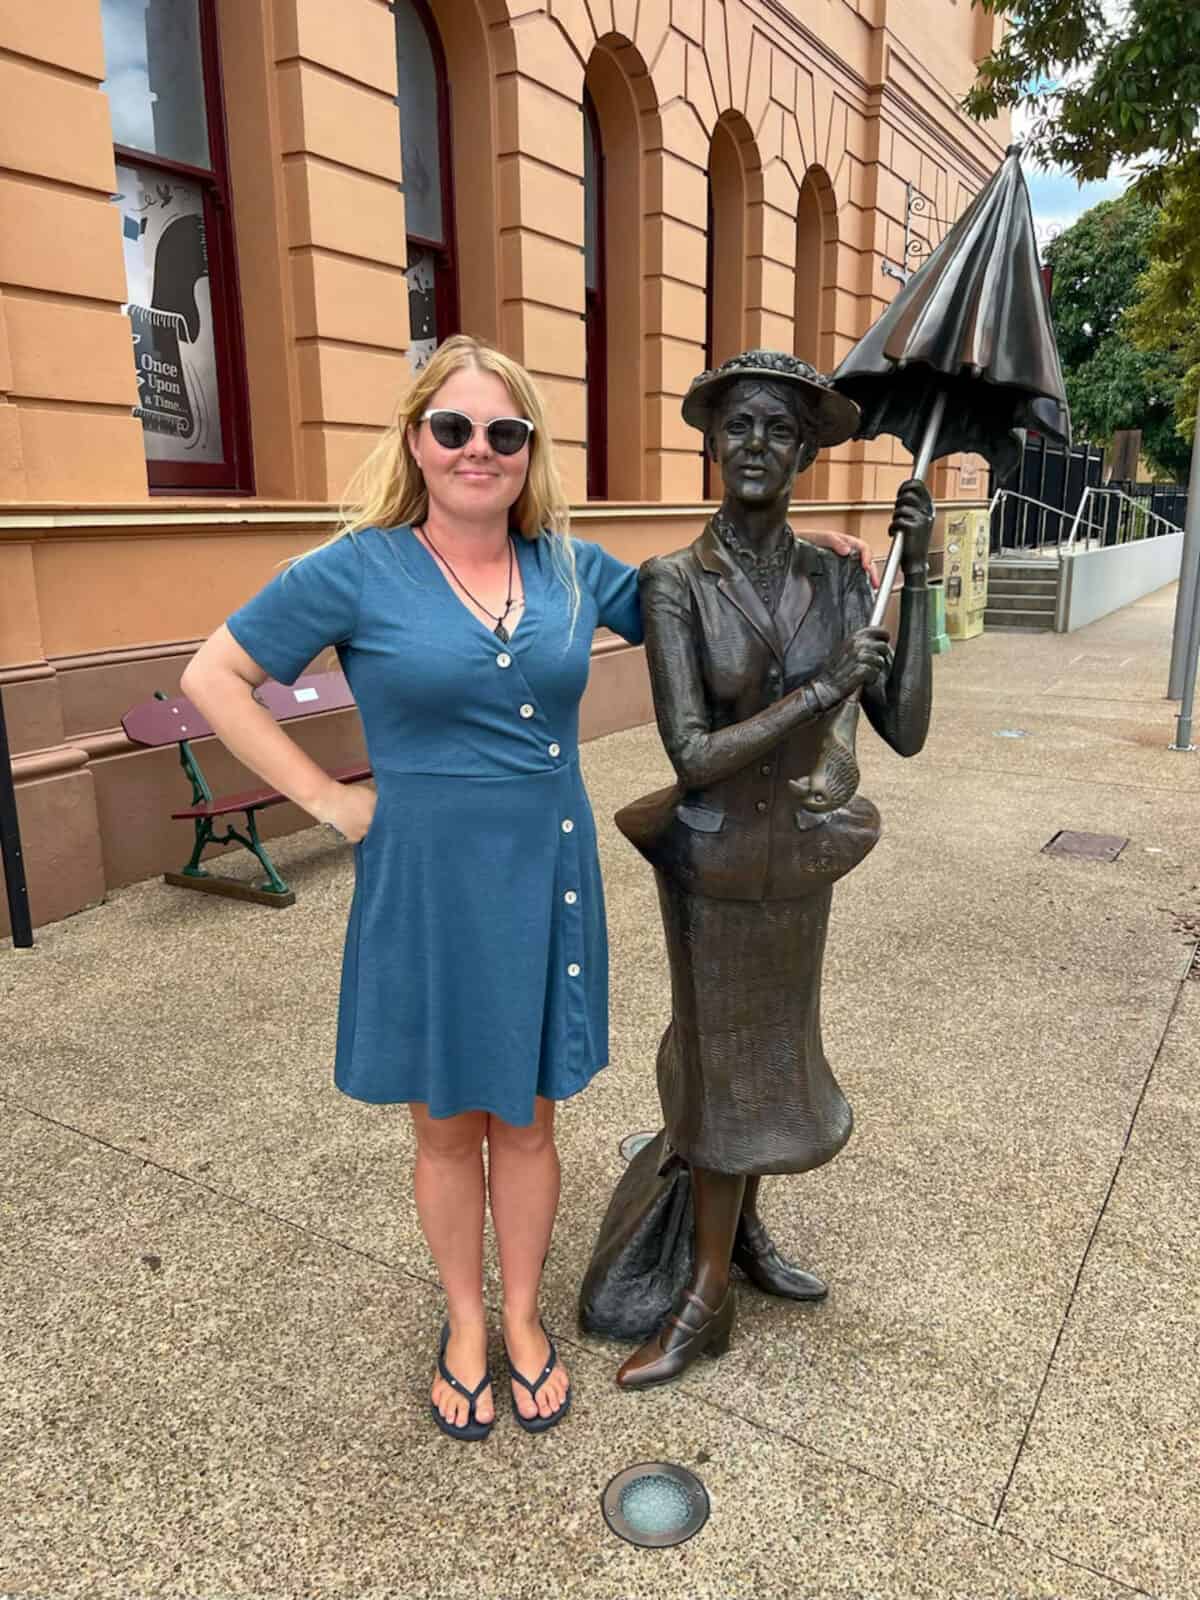 Shannon standing with a statue of Mary Poppins